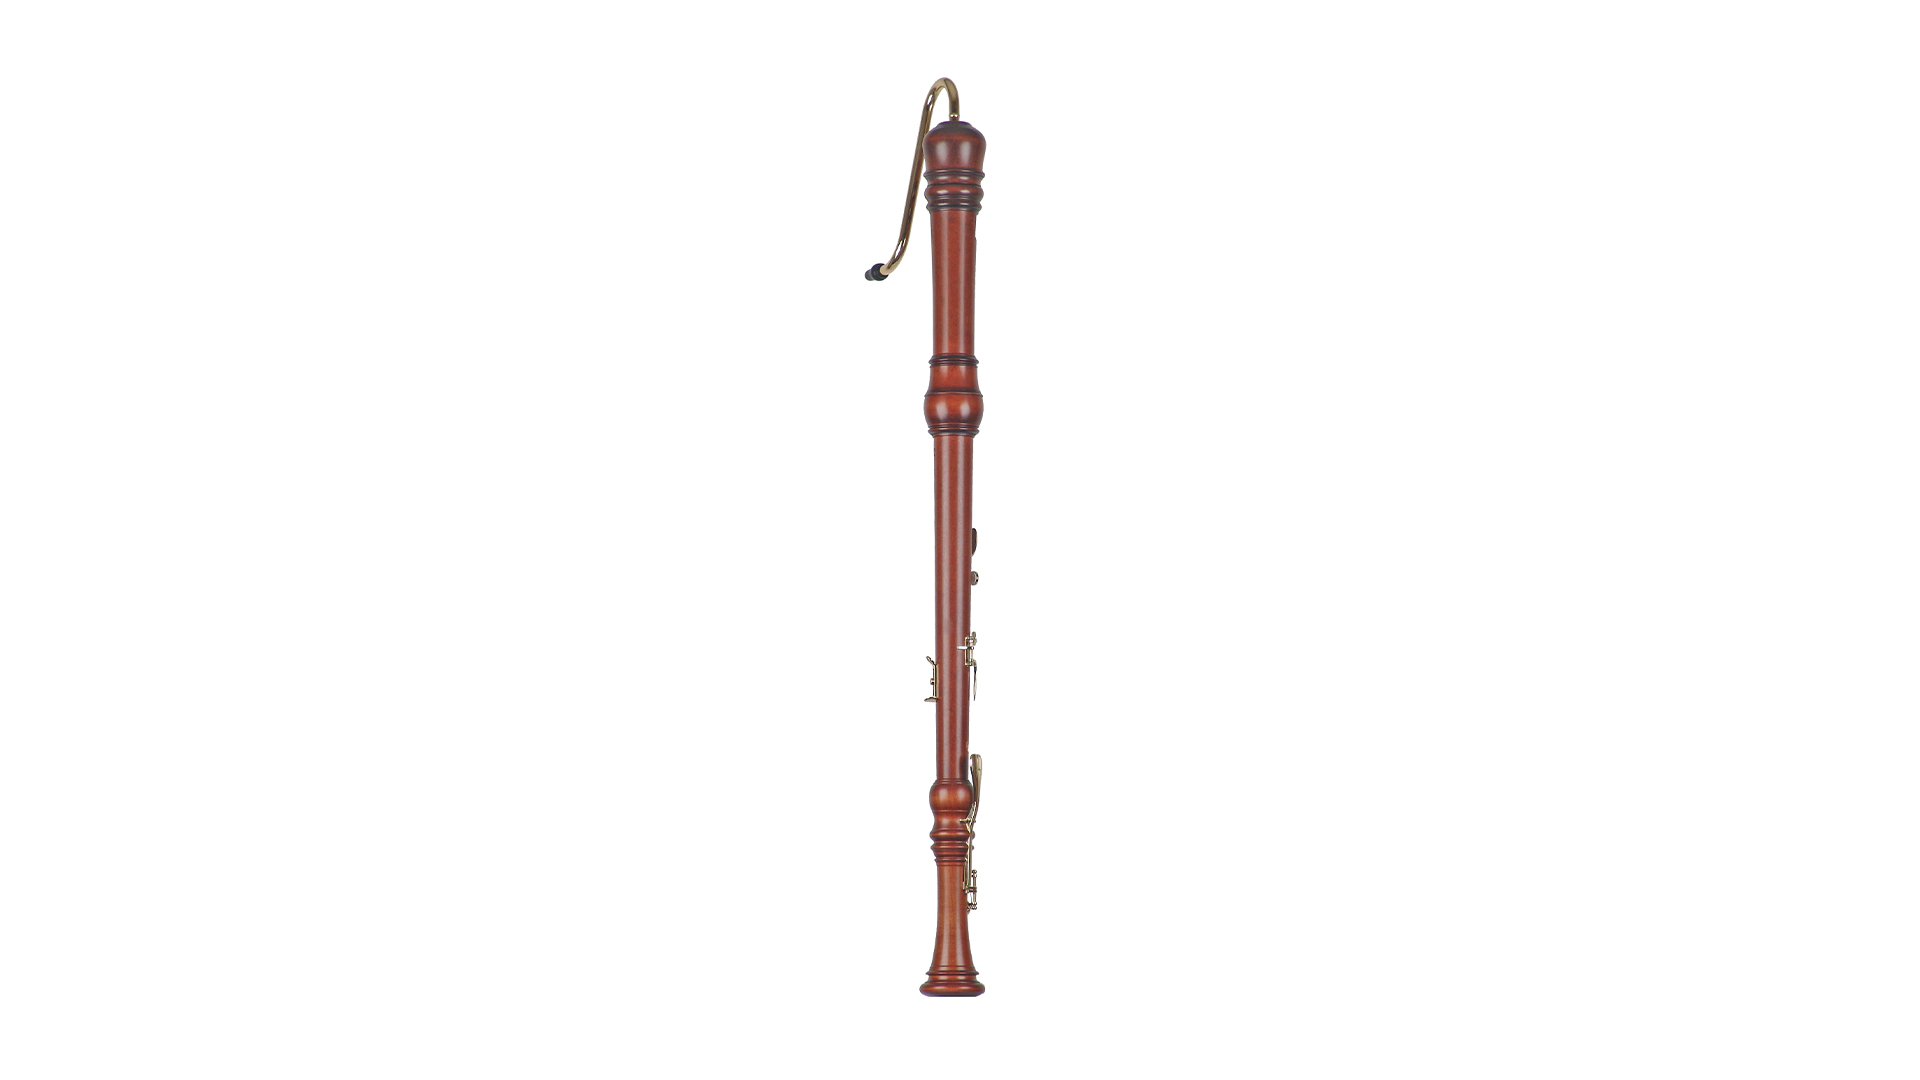 Moeck, "Rottenburgh", bass in f, baroque double hole, 415 Hz, maple stained, expandable to 442Hz